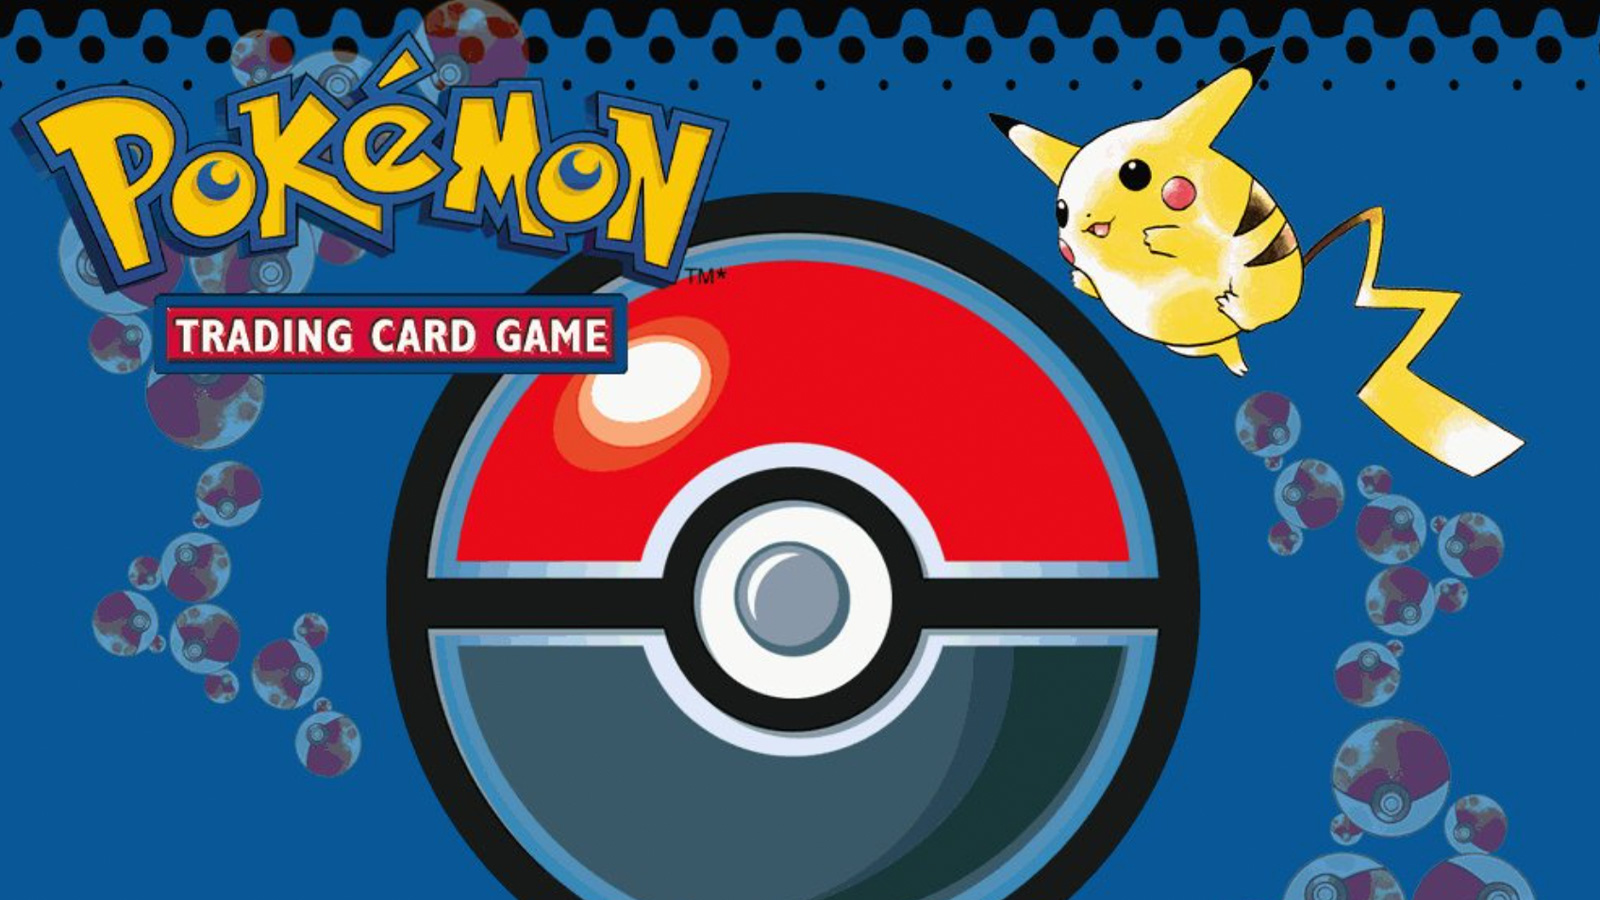 World's most valuable Pokémon card, Pikachu Illustrator, appears at auction  for almost half a million dollars